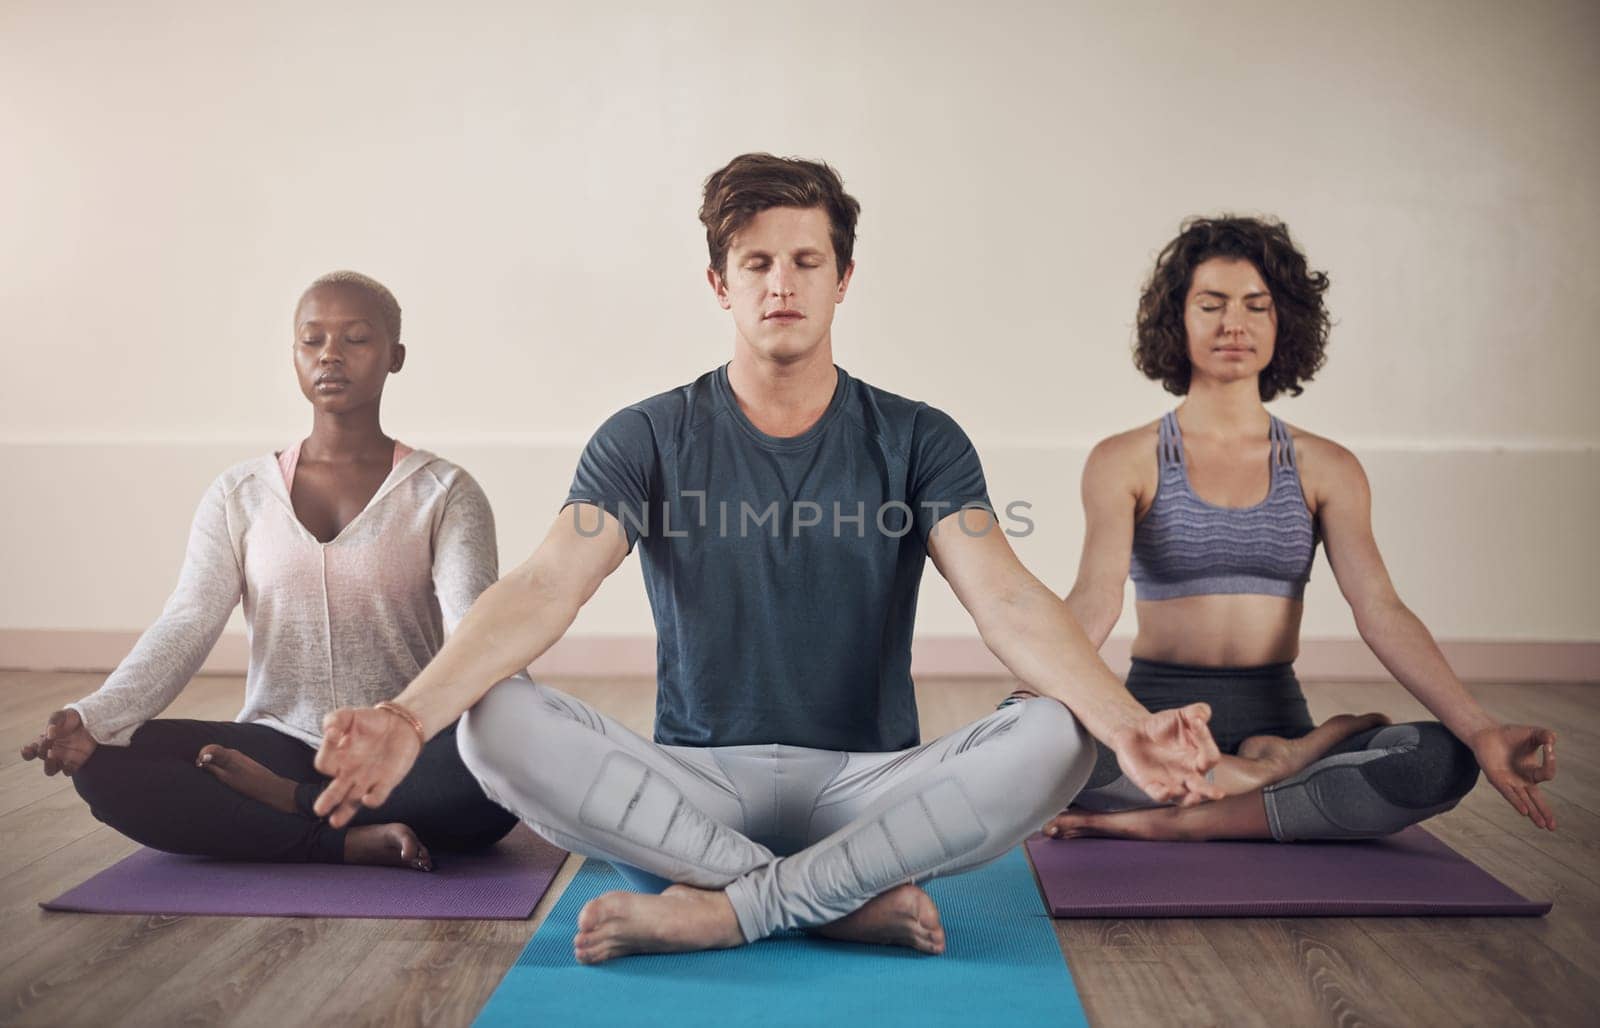 Go within every day and find the inner strength. Full length shot of a diverse group of yogis sitting together and meditating after an indoor yoga session. by YuriArcurs